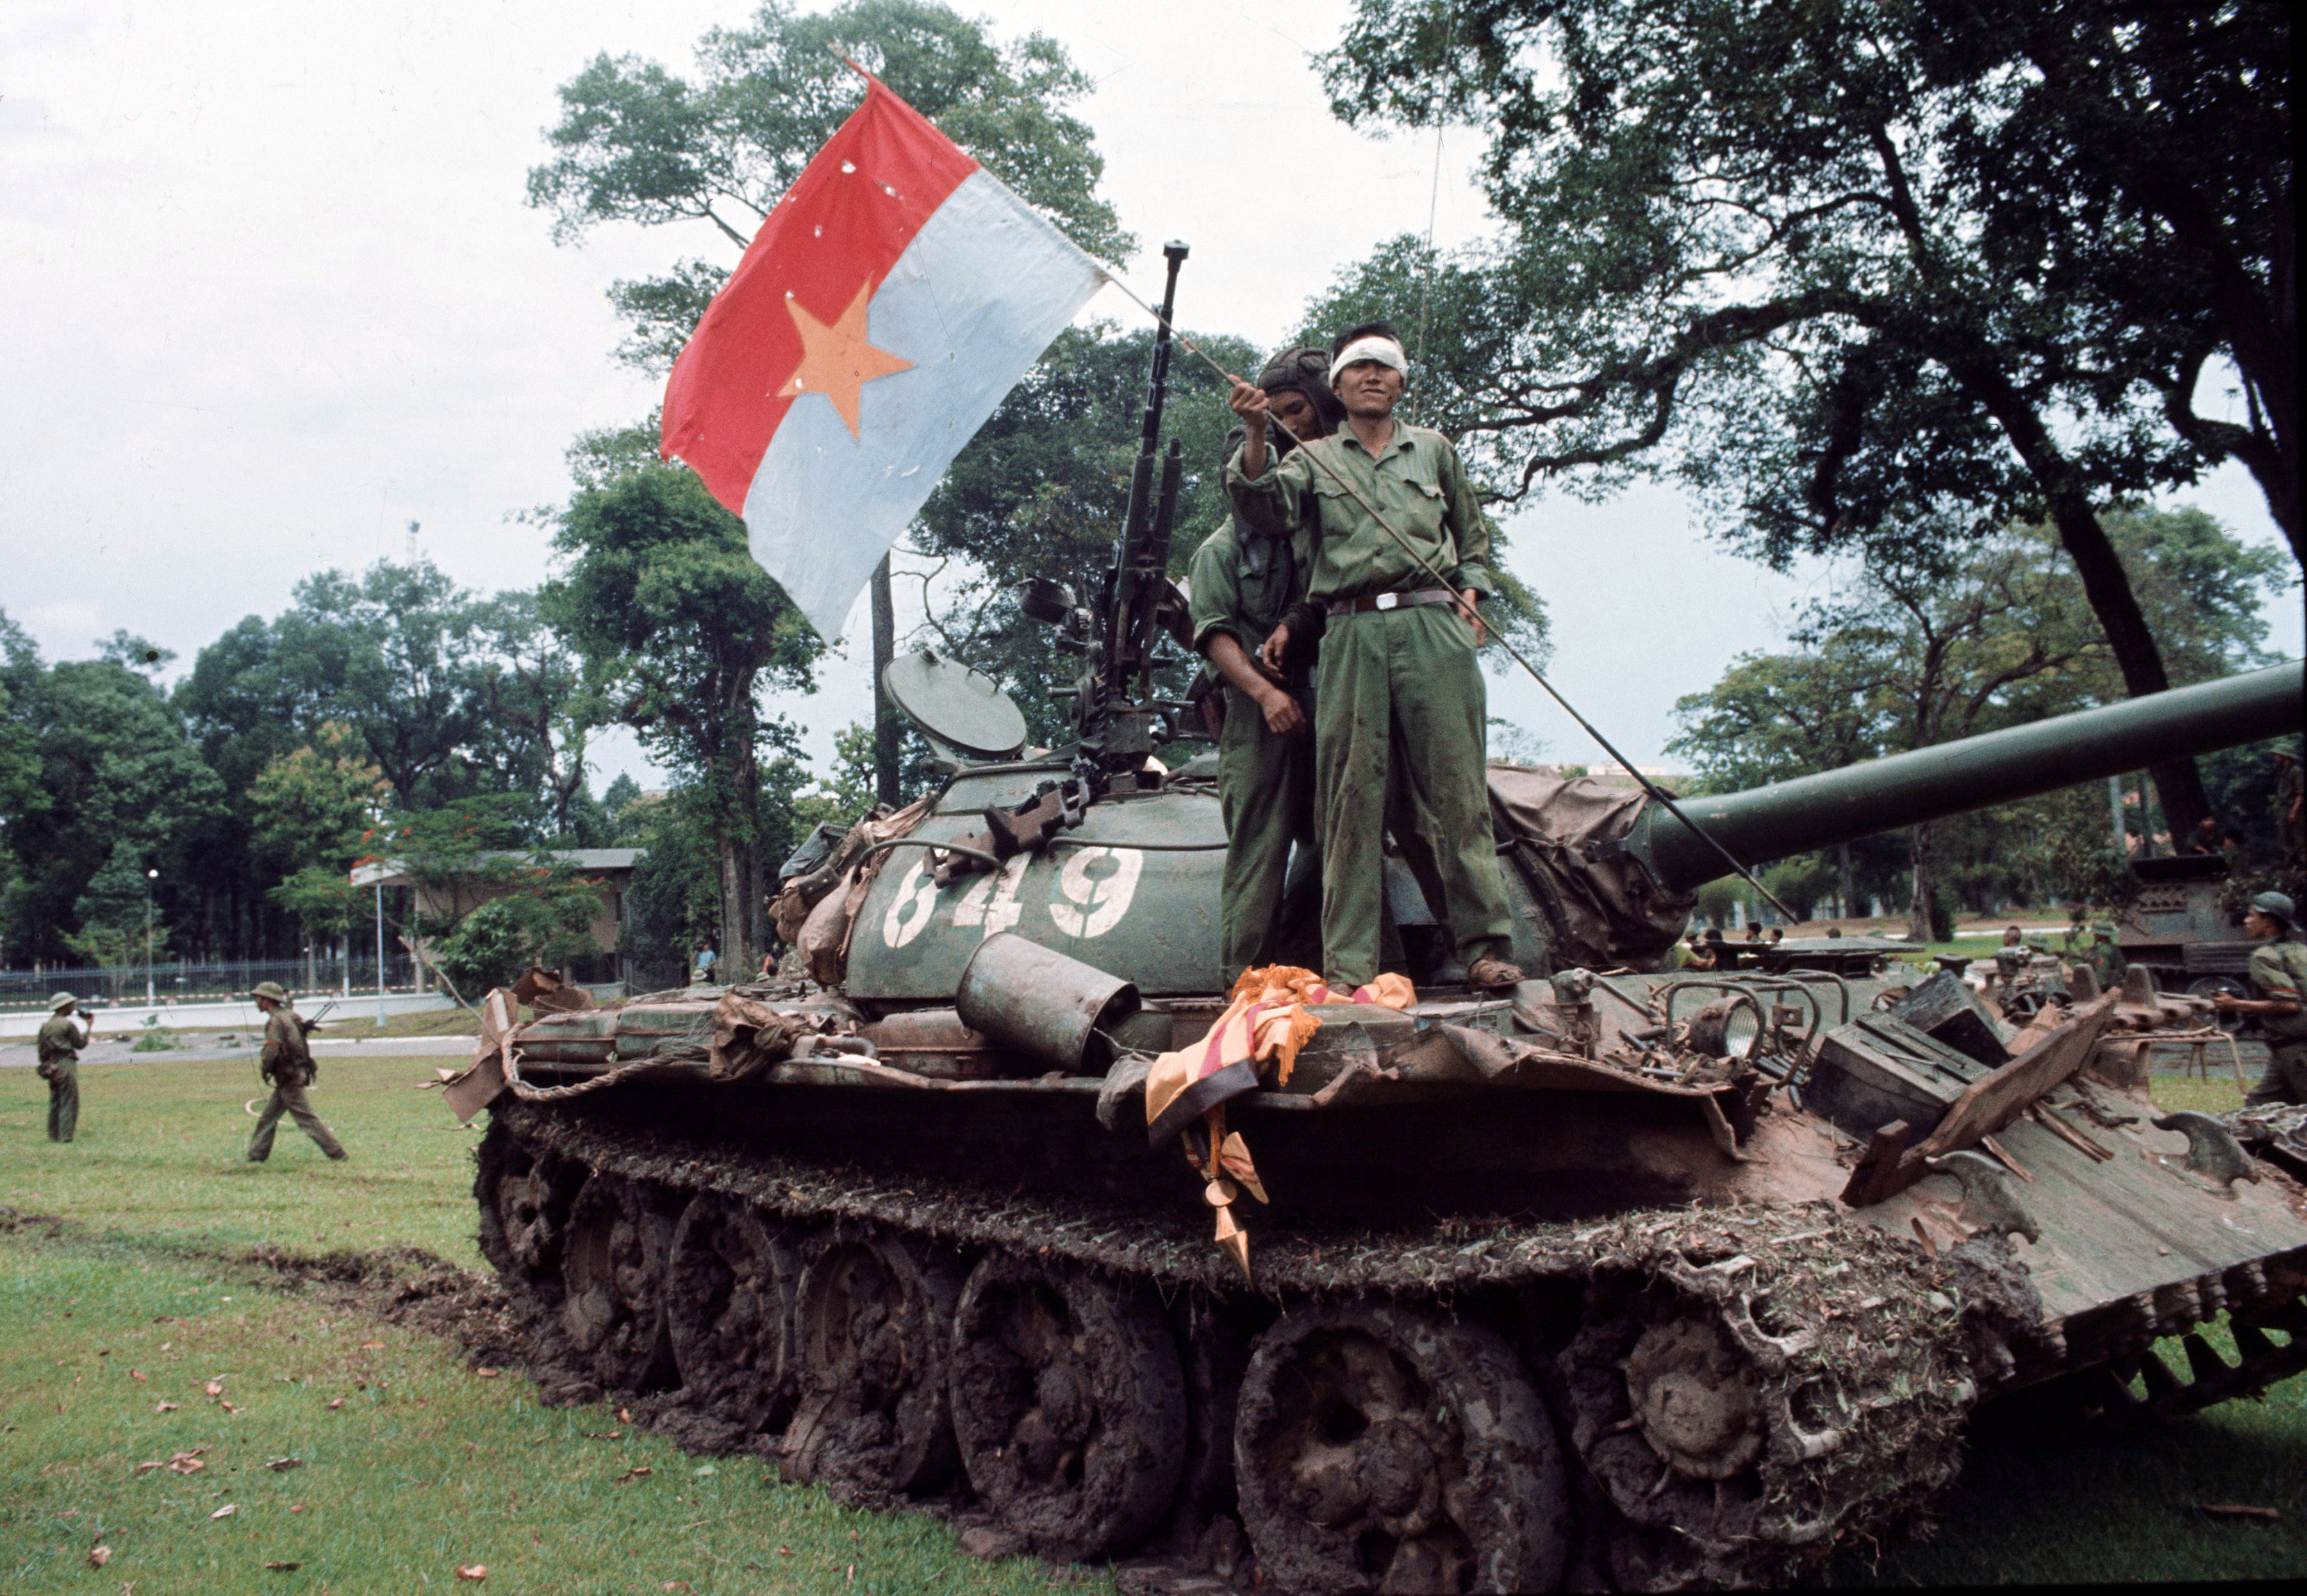 With a South Vietnamese flag at his feet, a victorious North Vietnamese soldier waves a communist flag from a tank outside Independence Palace in Saigon, April 30, 1975, the day the South Vietnamese government surrendered, ending the Vietnam War. (AP Photo/Yves Billy)